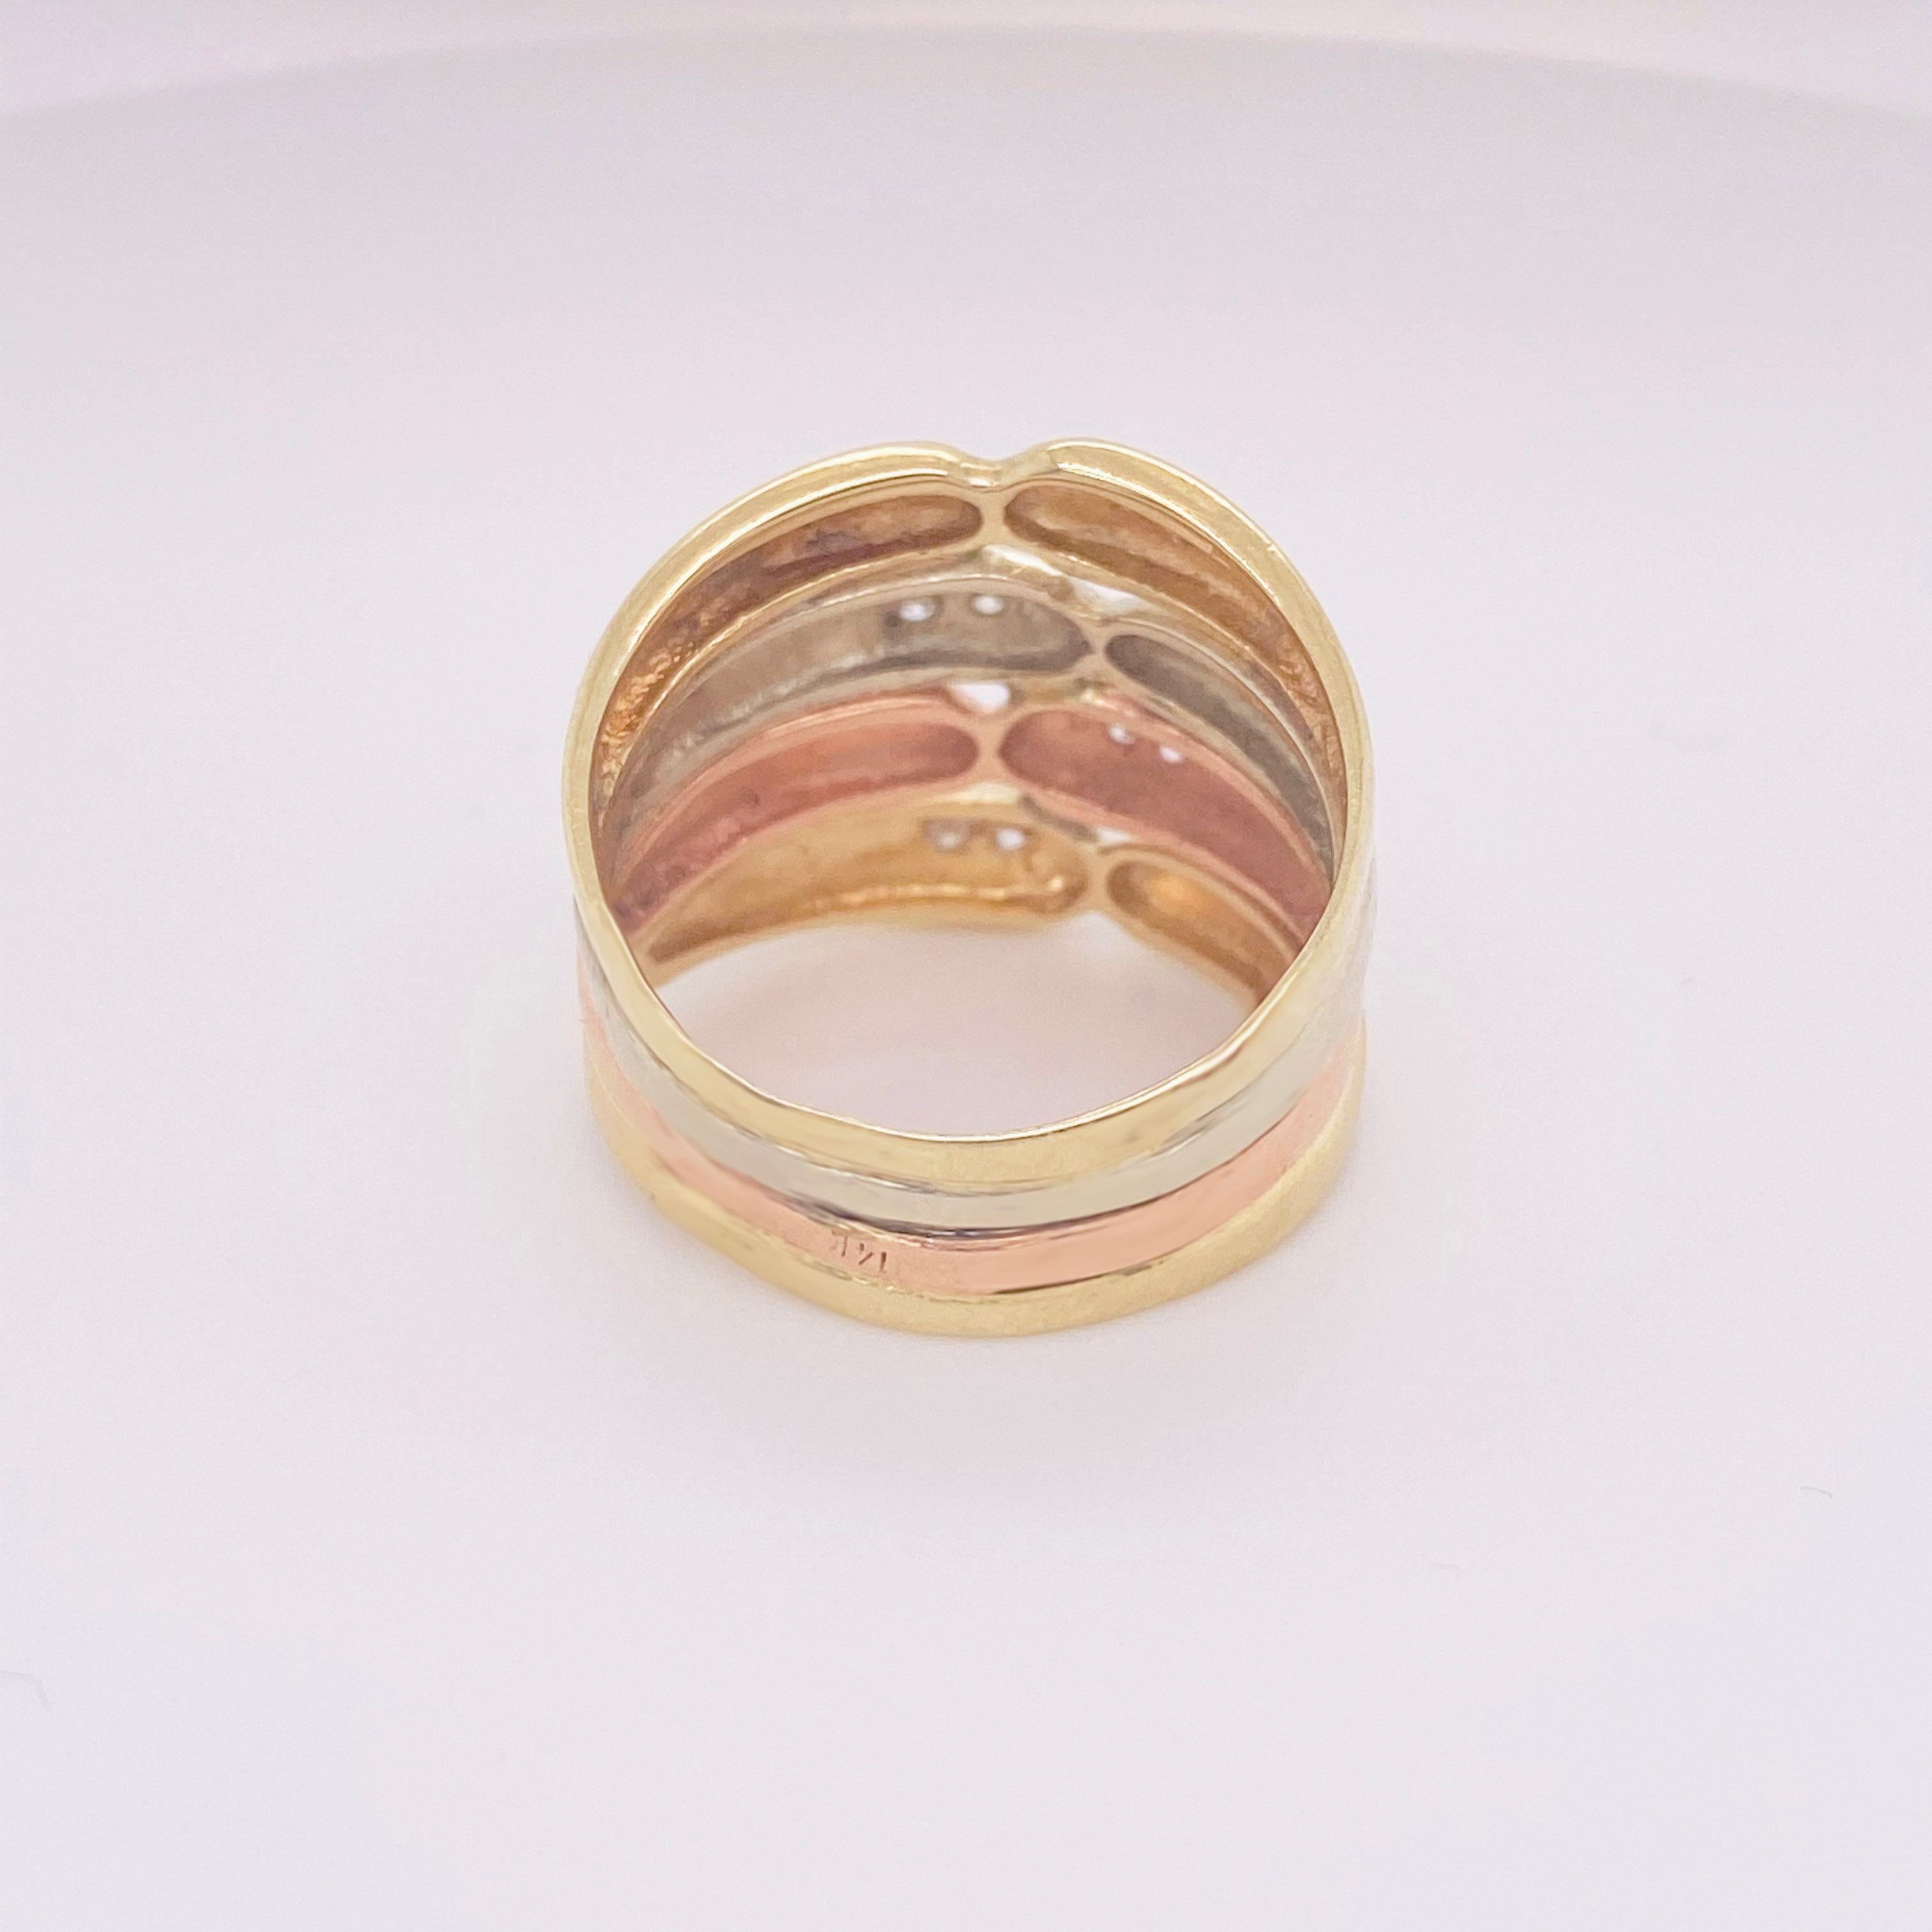 mixing rose gold and yellow gold